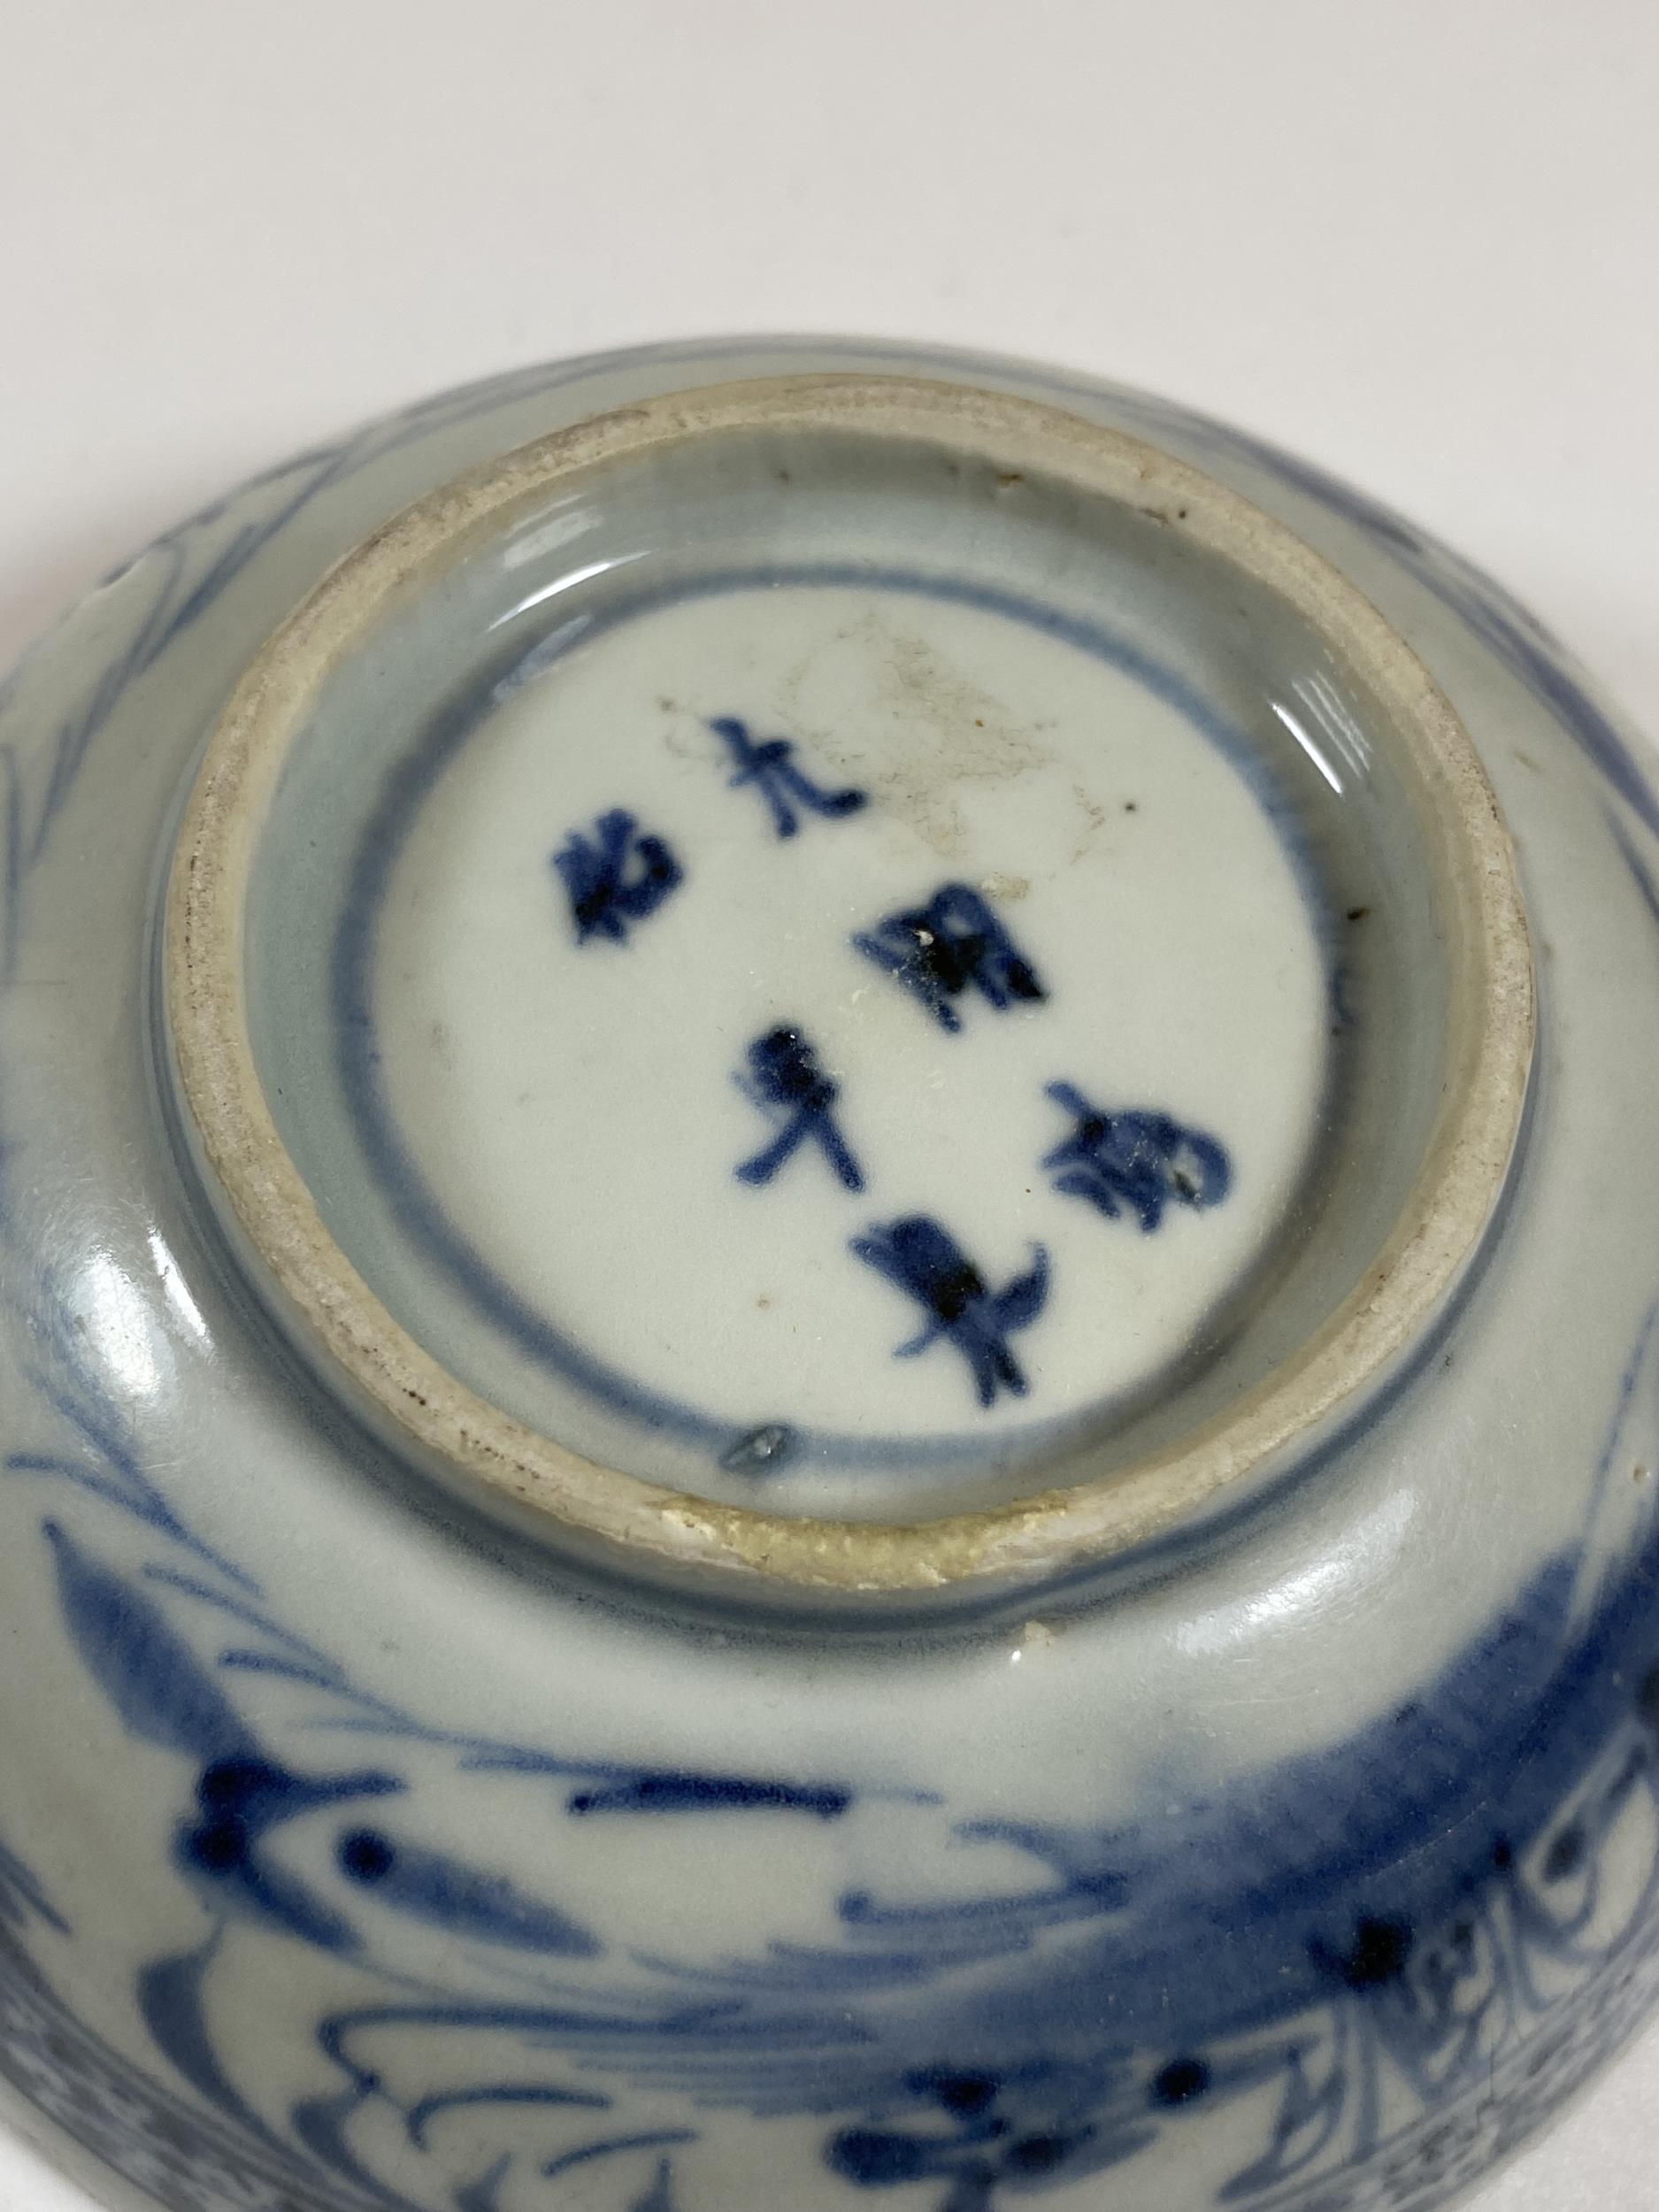 A BELIEVED MING DYNASTY CHINESE BLUE AND WHITE PORCELAIN BOWL, SIX CHARACTER MARK TO BASE DIAMETER - Image 5 of 6